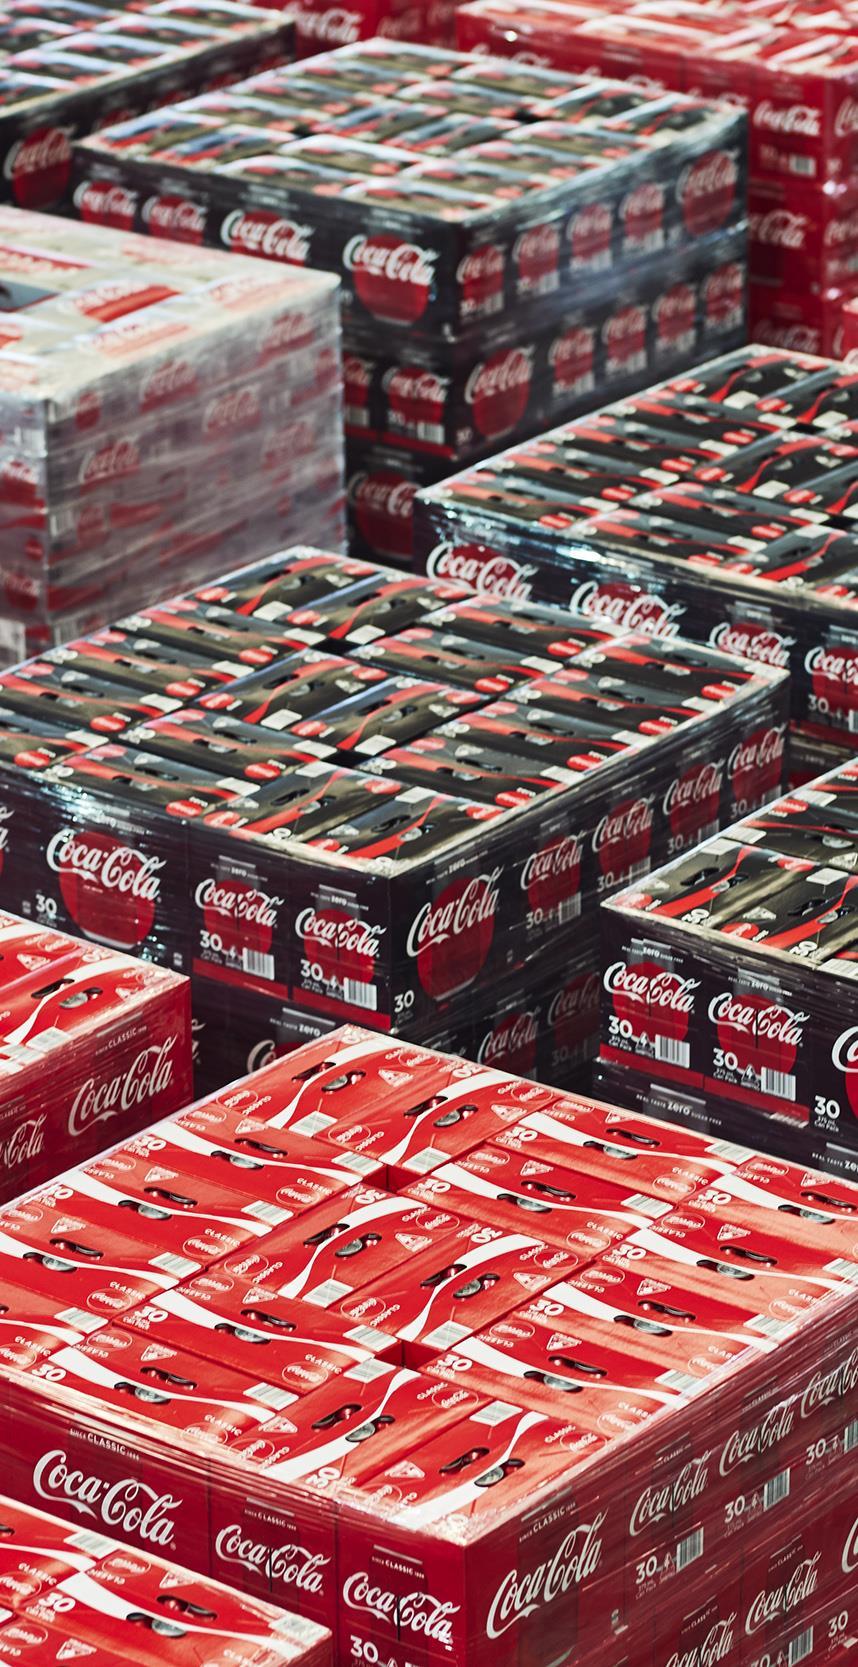 OUR SHAREHOLDER VALUE PROPOSITION IS BASED ON A COMPELLING INVESTMENT CASE INVESTMENT CASE 1. Predominantly a Coca-Cola franchisee with leading brands 2. Route-to-market with scale and reach 3.